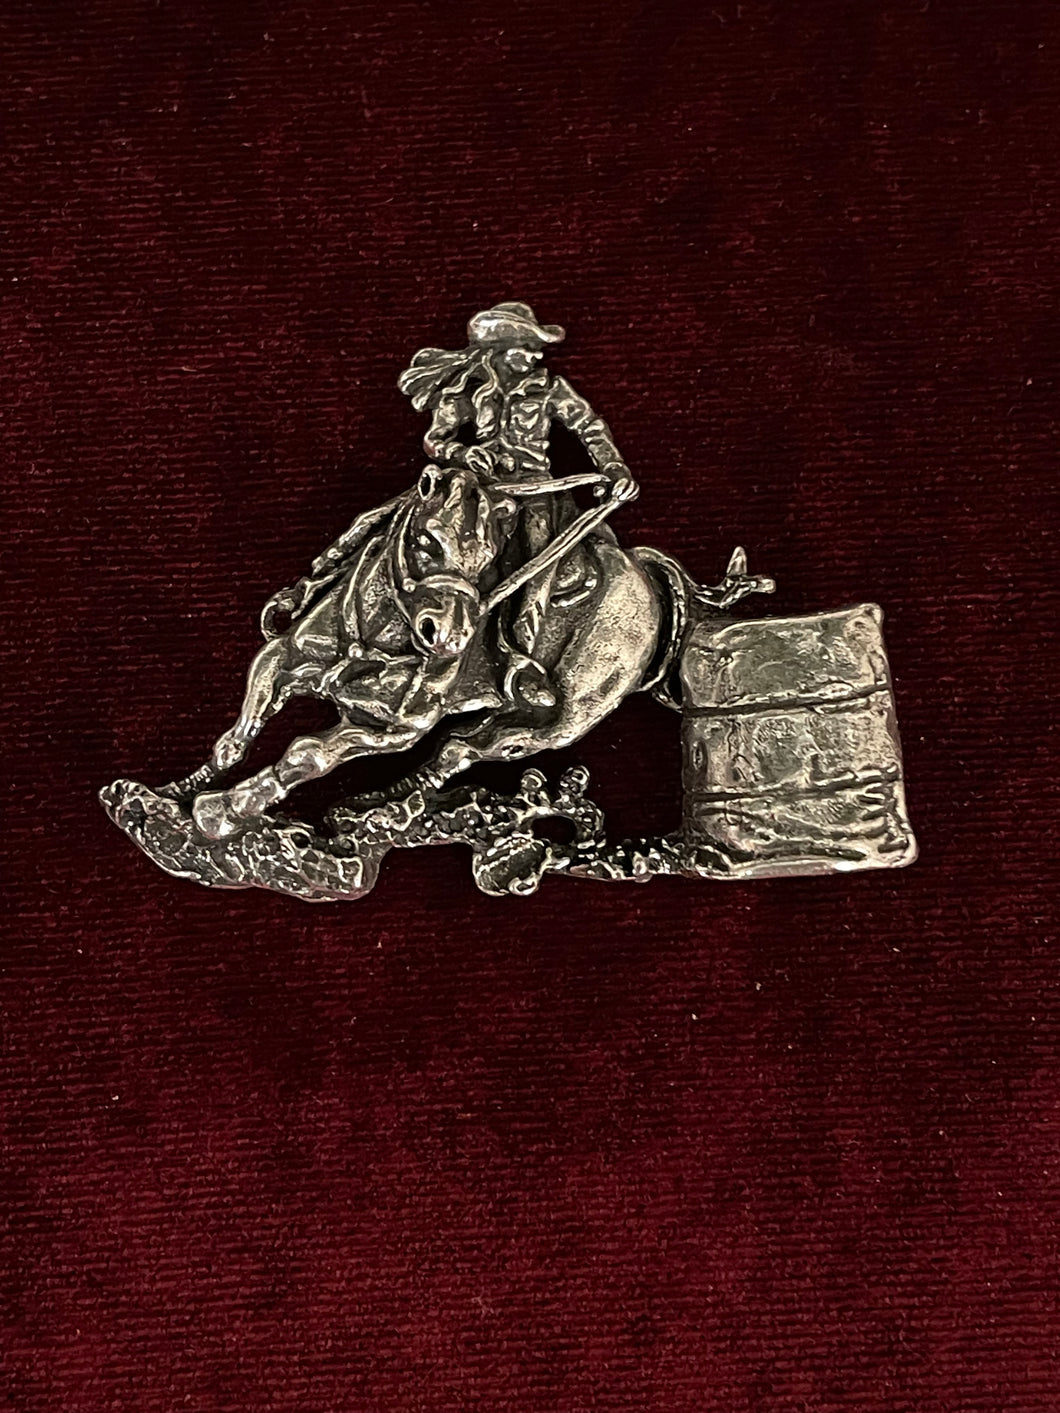 Girl barrel racer silver hat pin. Measures 2” long and 22” wide